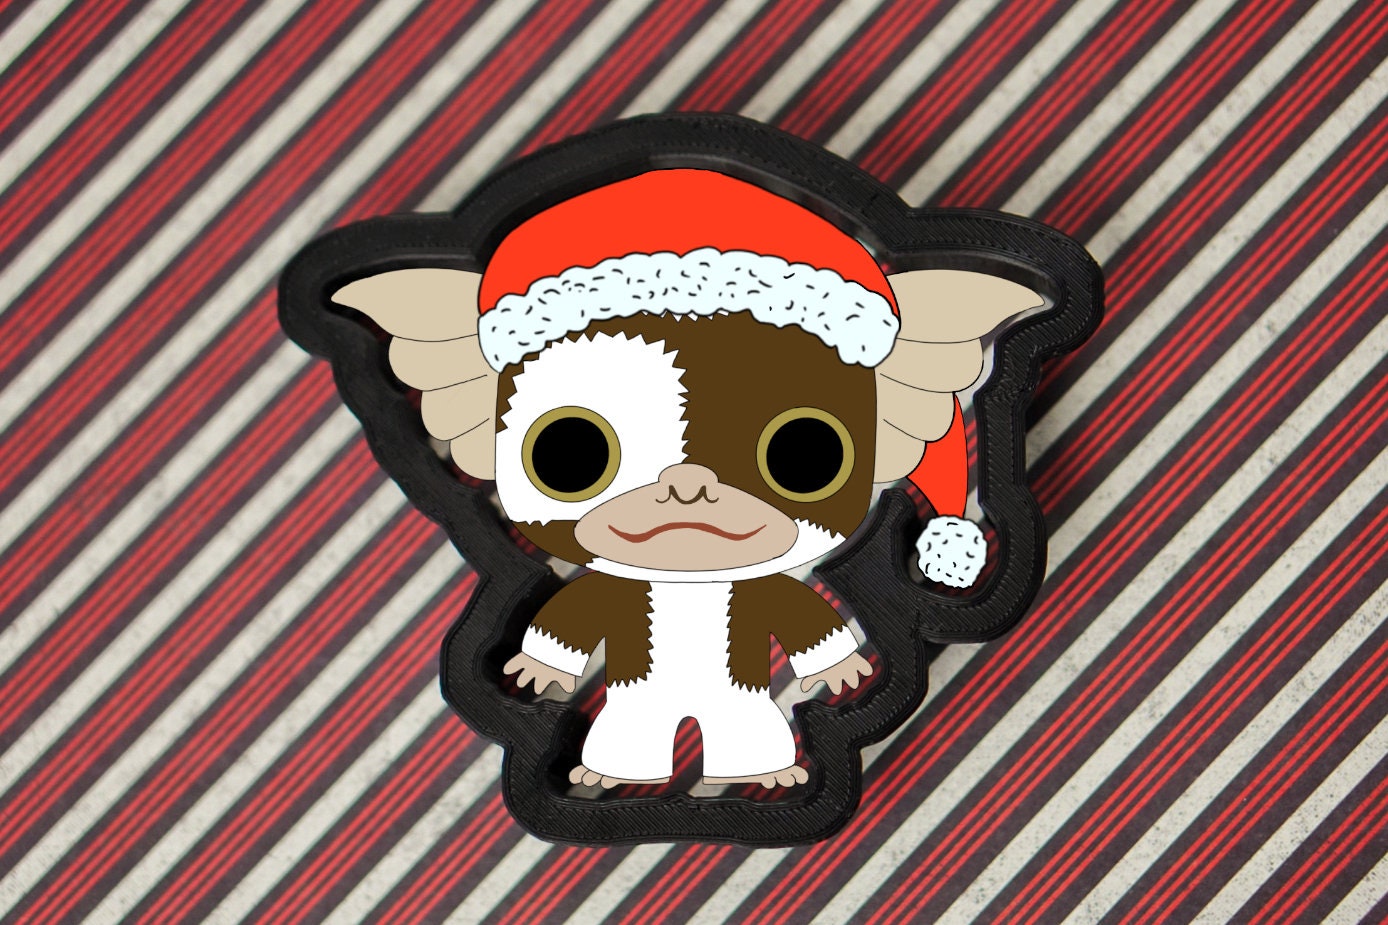 Gremlins Gizmo Santa Hanging Decoration. – Paws with Claws Fundraising -  Charlie's Campaign